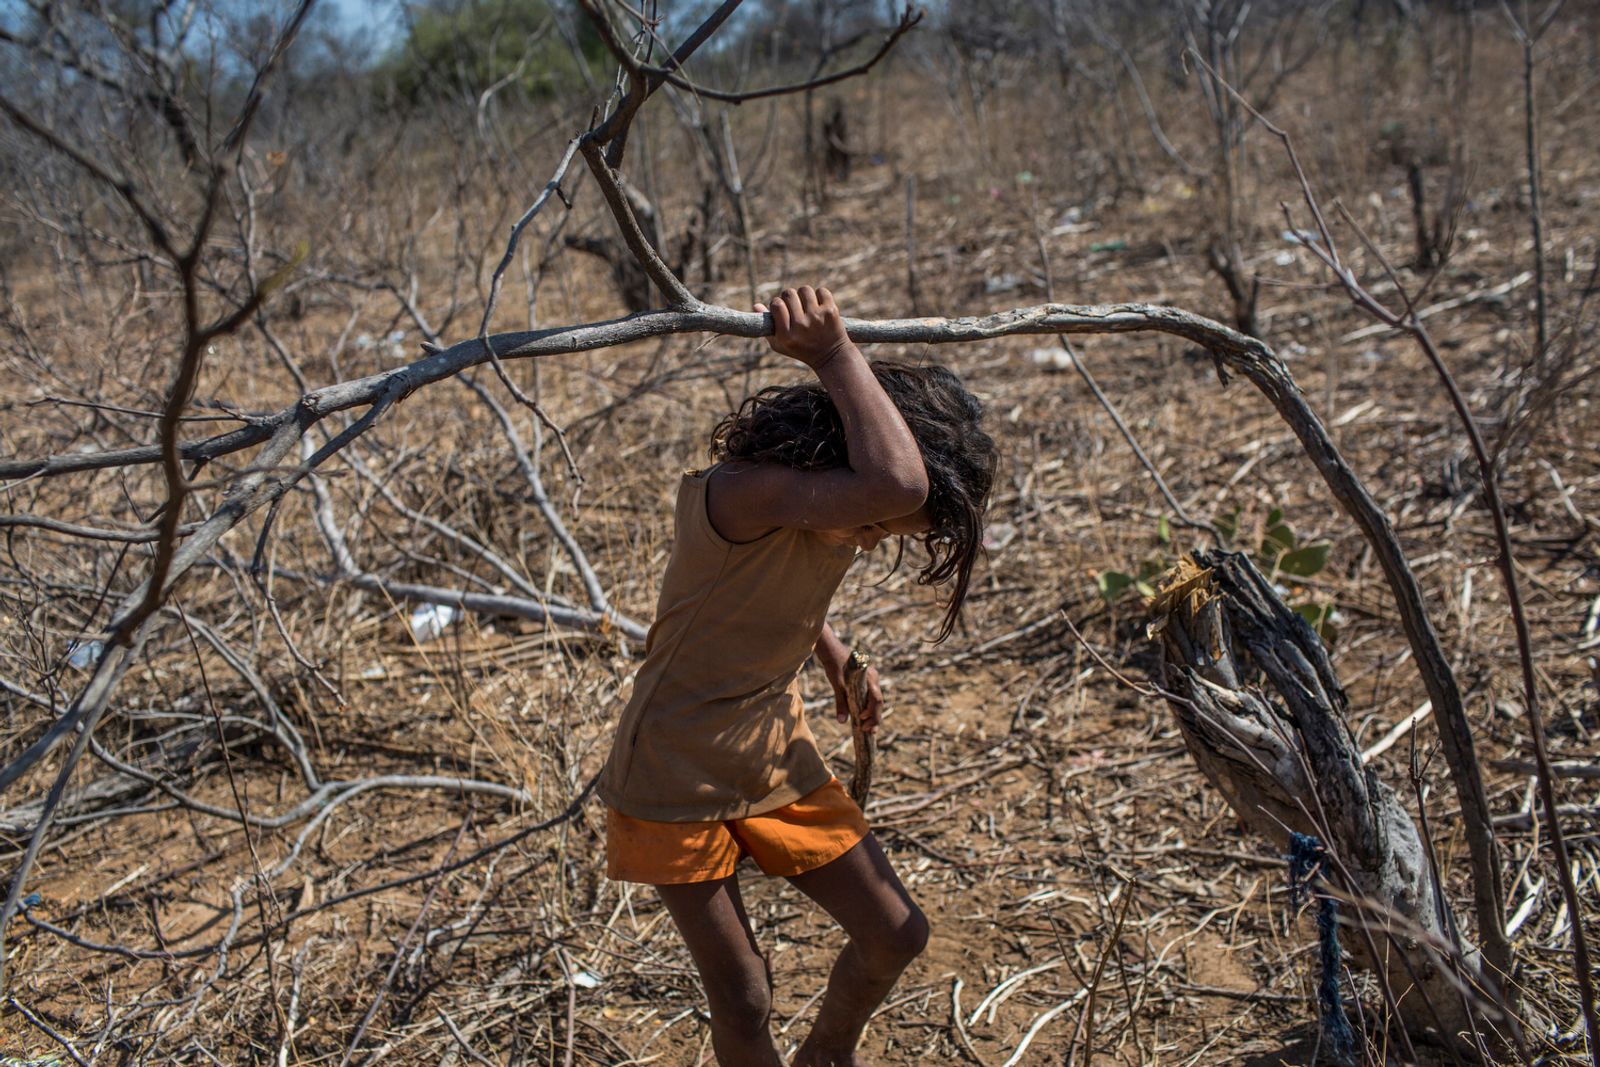 © Lianne Milton - Image from the Hinterland: Stories from the Caatinga photography project